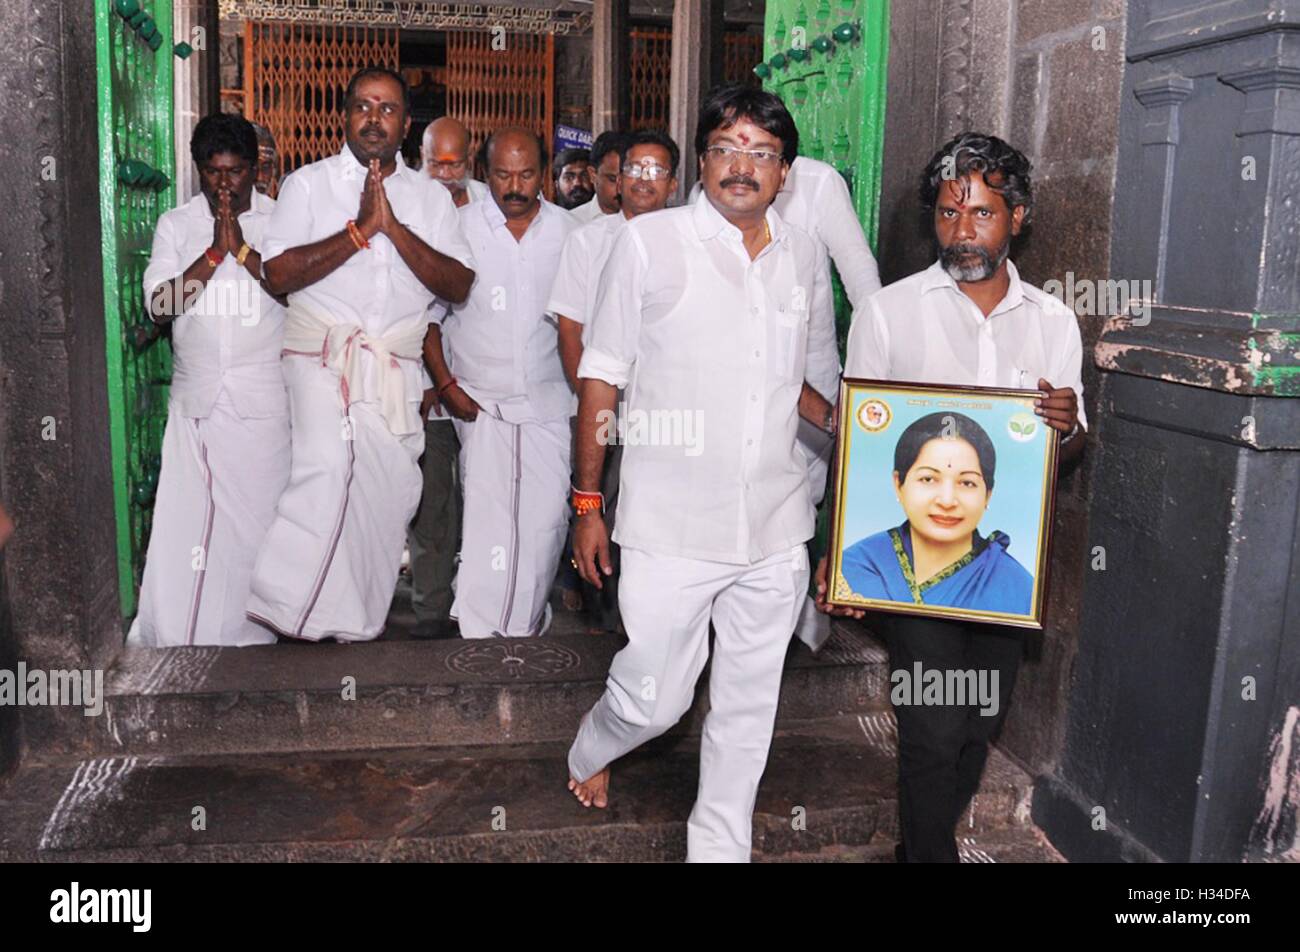 AIADMK party leaders offer prayer for Tamil Nadu Chief Minister J Jayalalithaa speedy recovery in Chennai, India on September Stock Photo